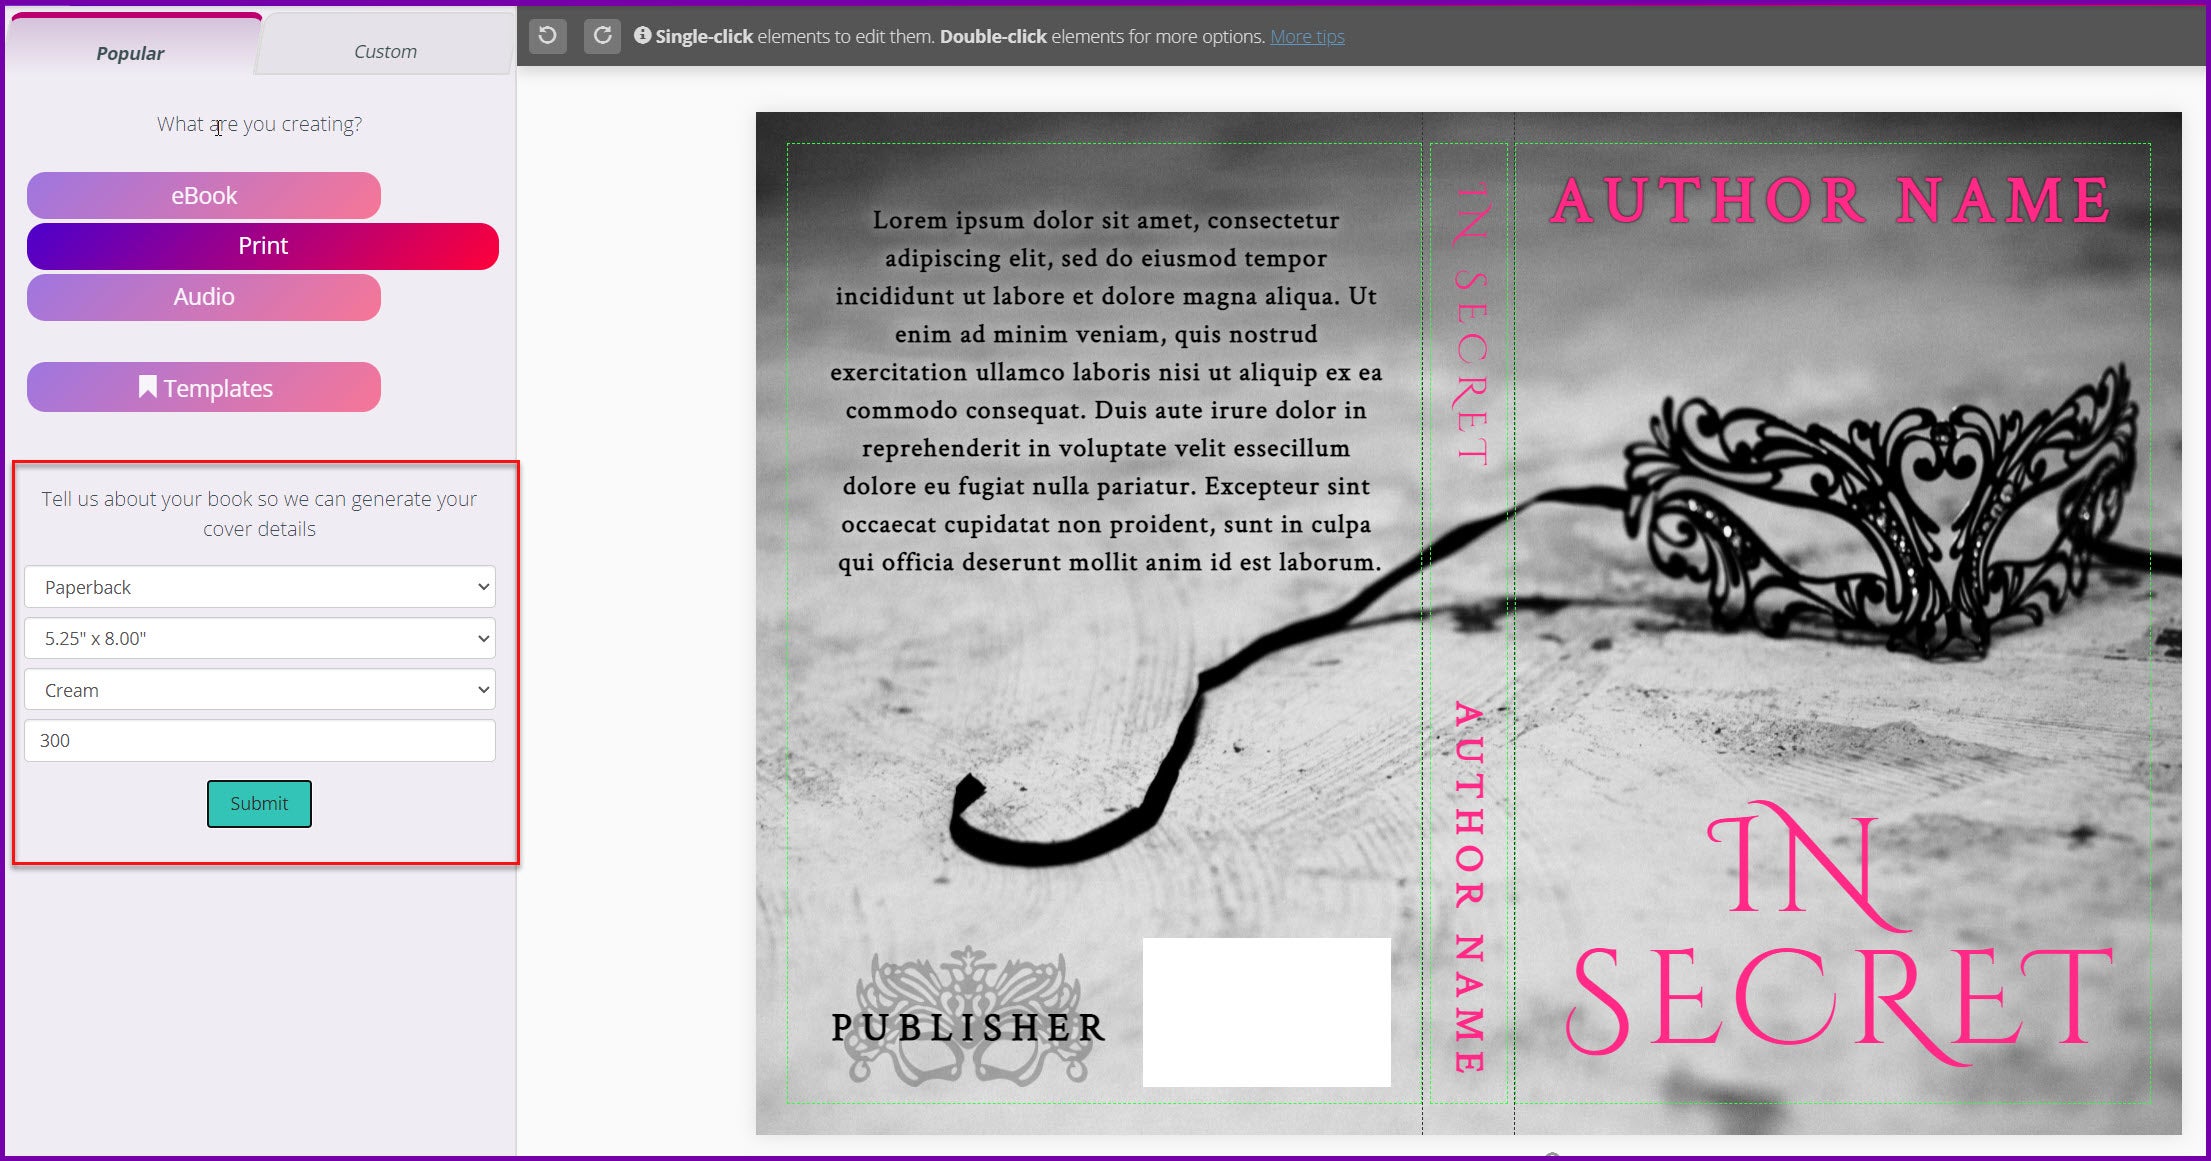 Quick and easy is what the image shows to make the template the size for your paperback book